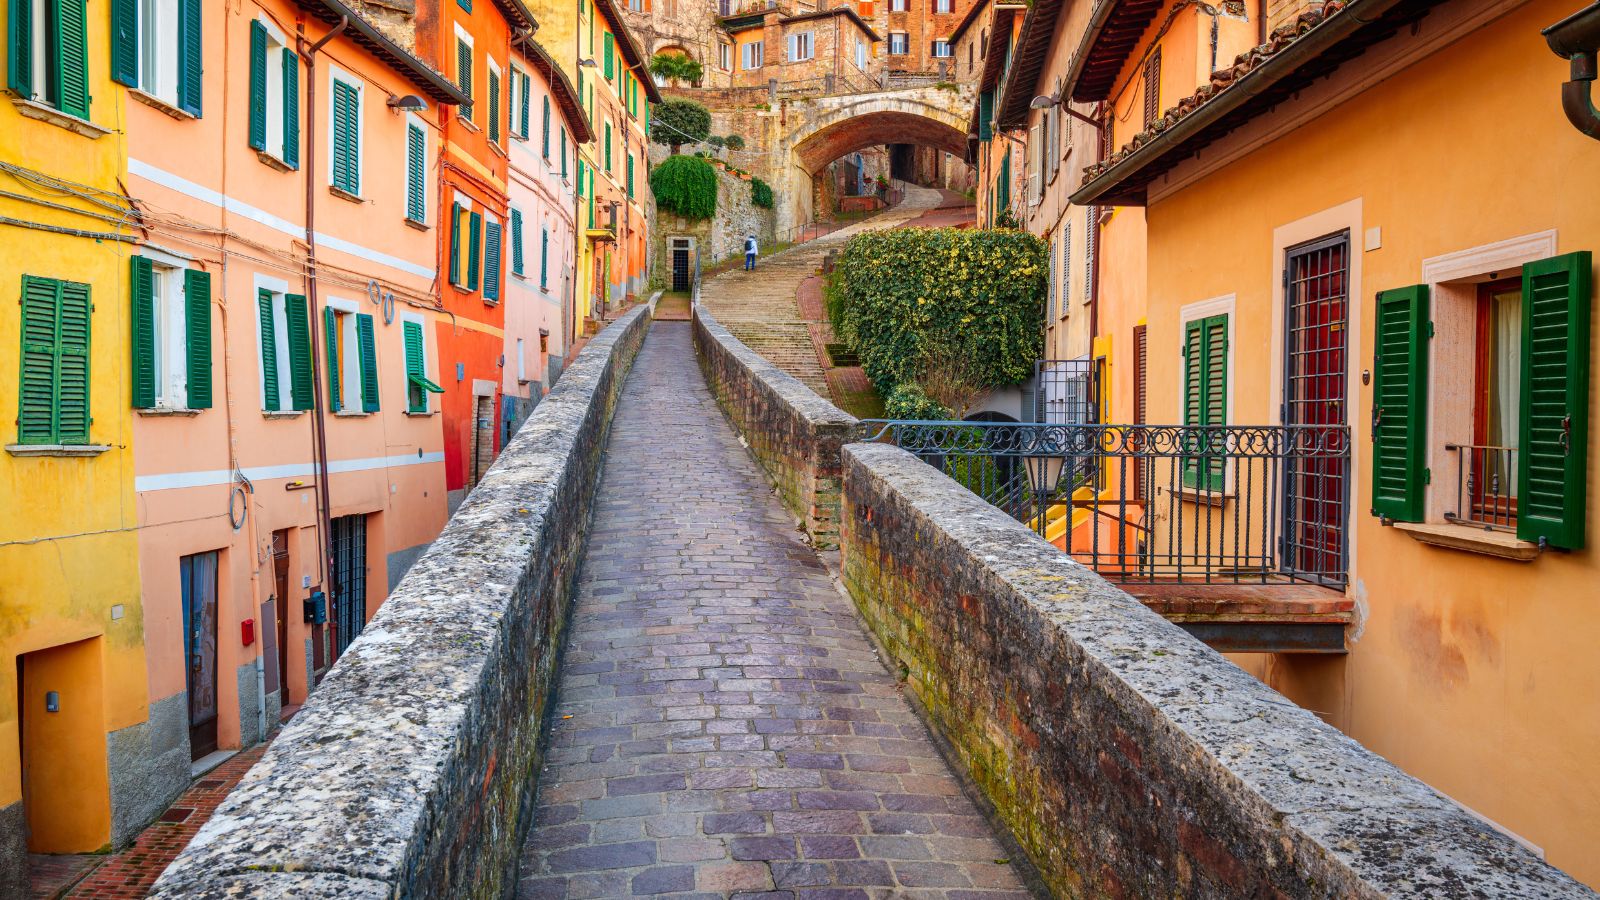 <p><a href="https://turismo.comune.perugia.it/pagine/welcome-to-perugia">Città di Perugia</a> tells us, “Perugia is a city full of ‘secrets’ to disclose: the suggestion is to explore it with curiosity to fully appreciate the excitement and fascination of discovery.” You can visit its medieval center and explore its historic buildings and Etruscan walls. </p>